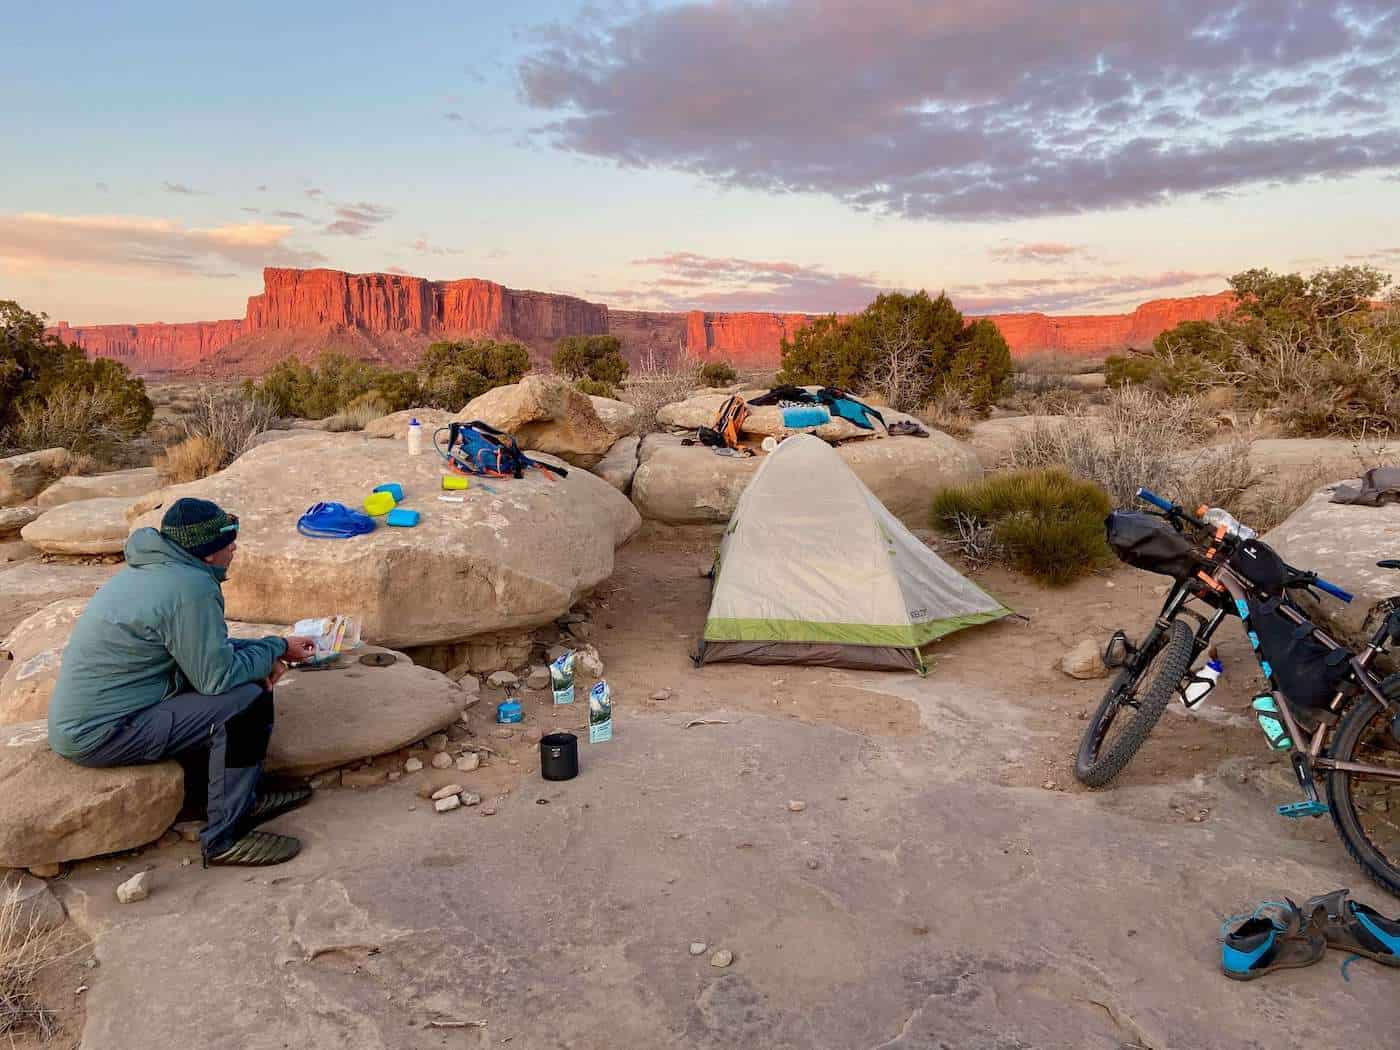 Man sitting on rock at dispersed bikepacking campsite with camping gear laid out around him. Sun is setting on red rock Utah bluffs in distance